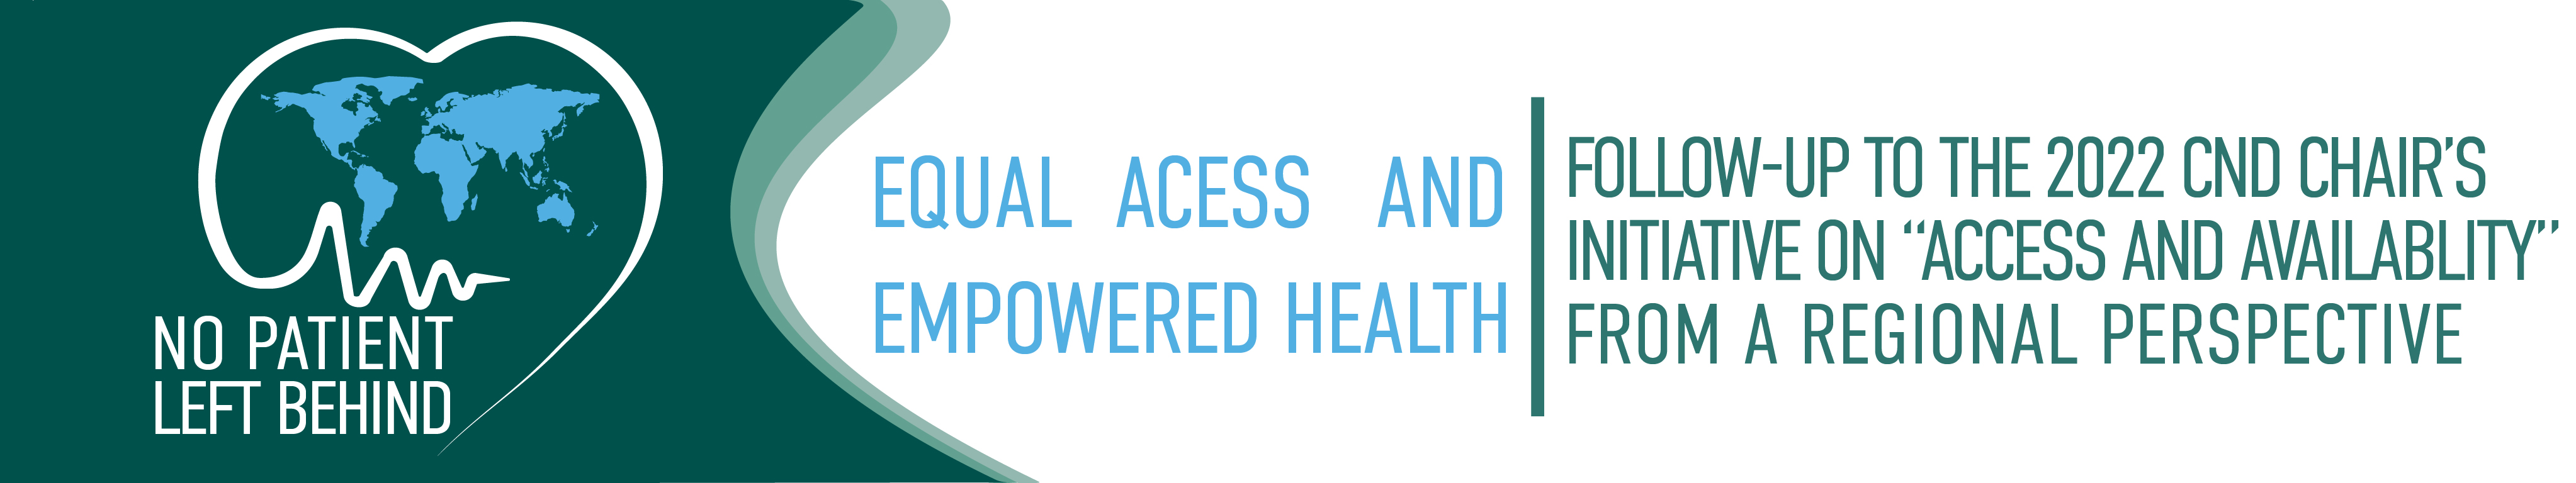 Equal Access, Empowered Health - No Patient Left Behind